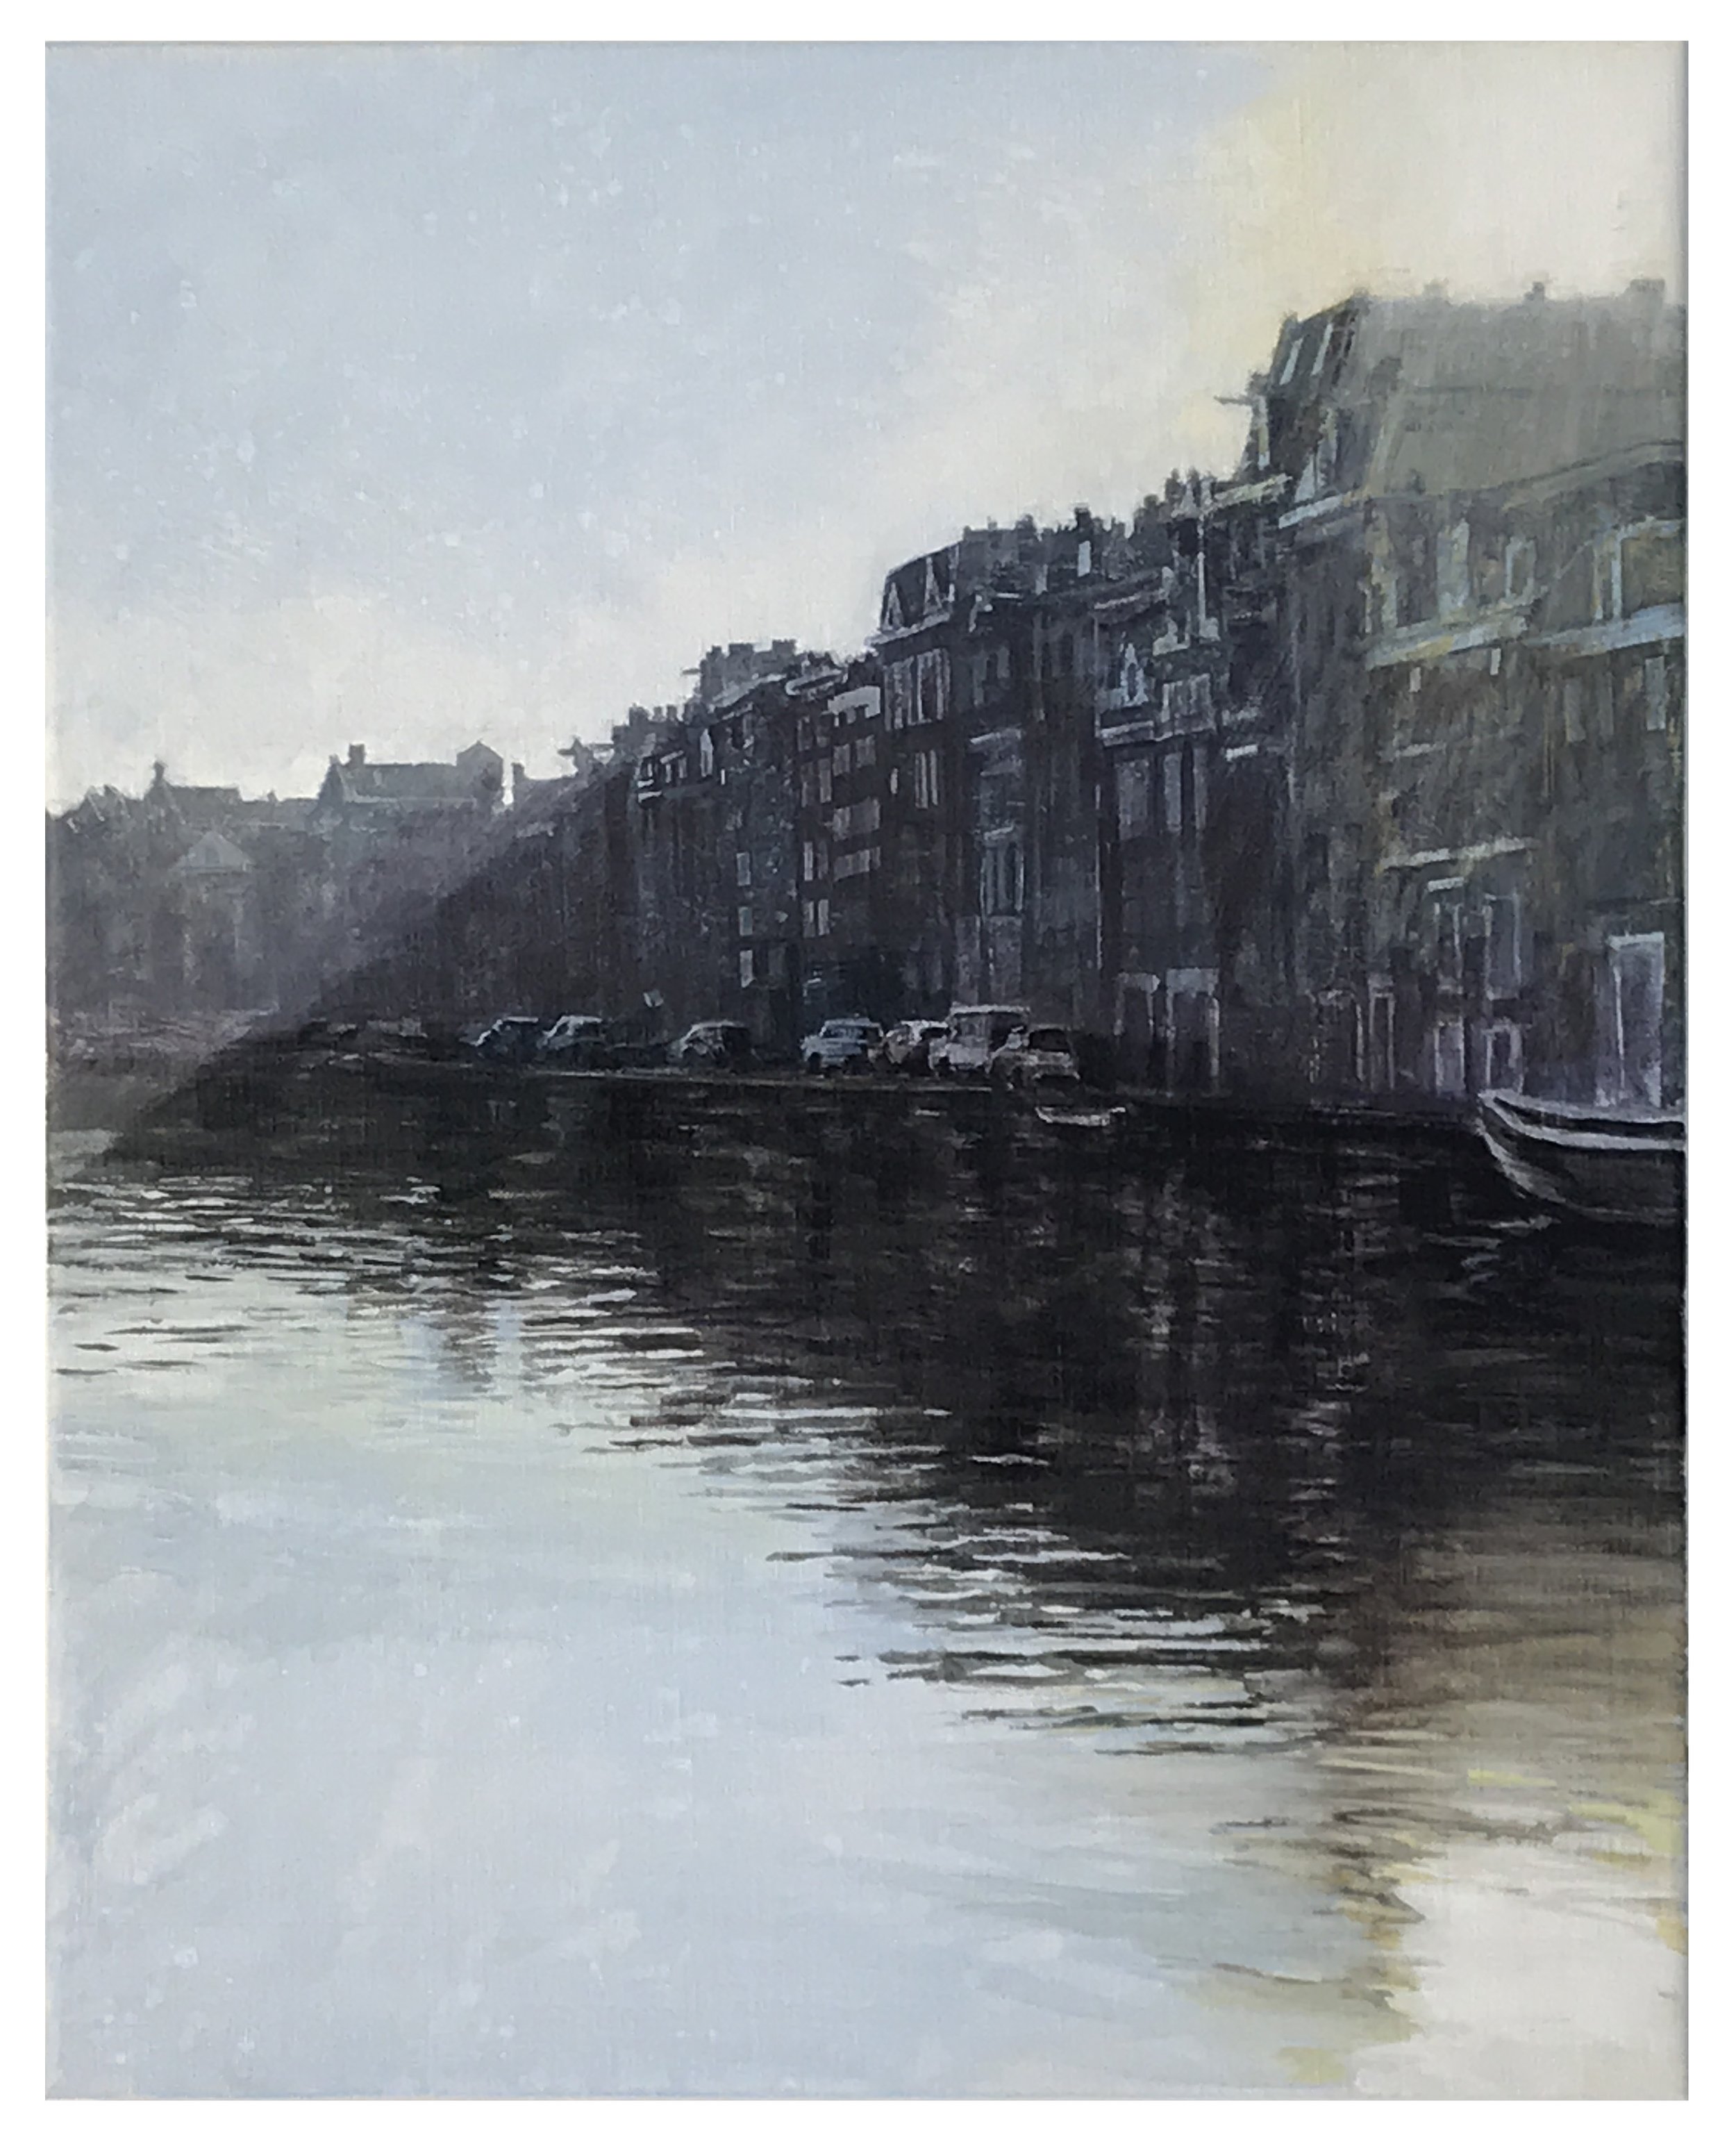  Early Morning, Prinsengracht 24 x 19 inches (60 x 48 cm) Acrylic on linen 2021 